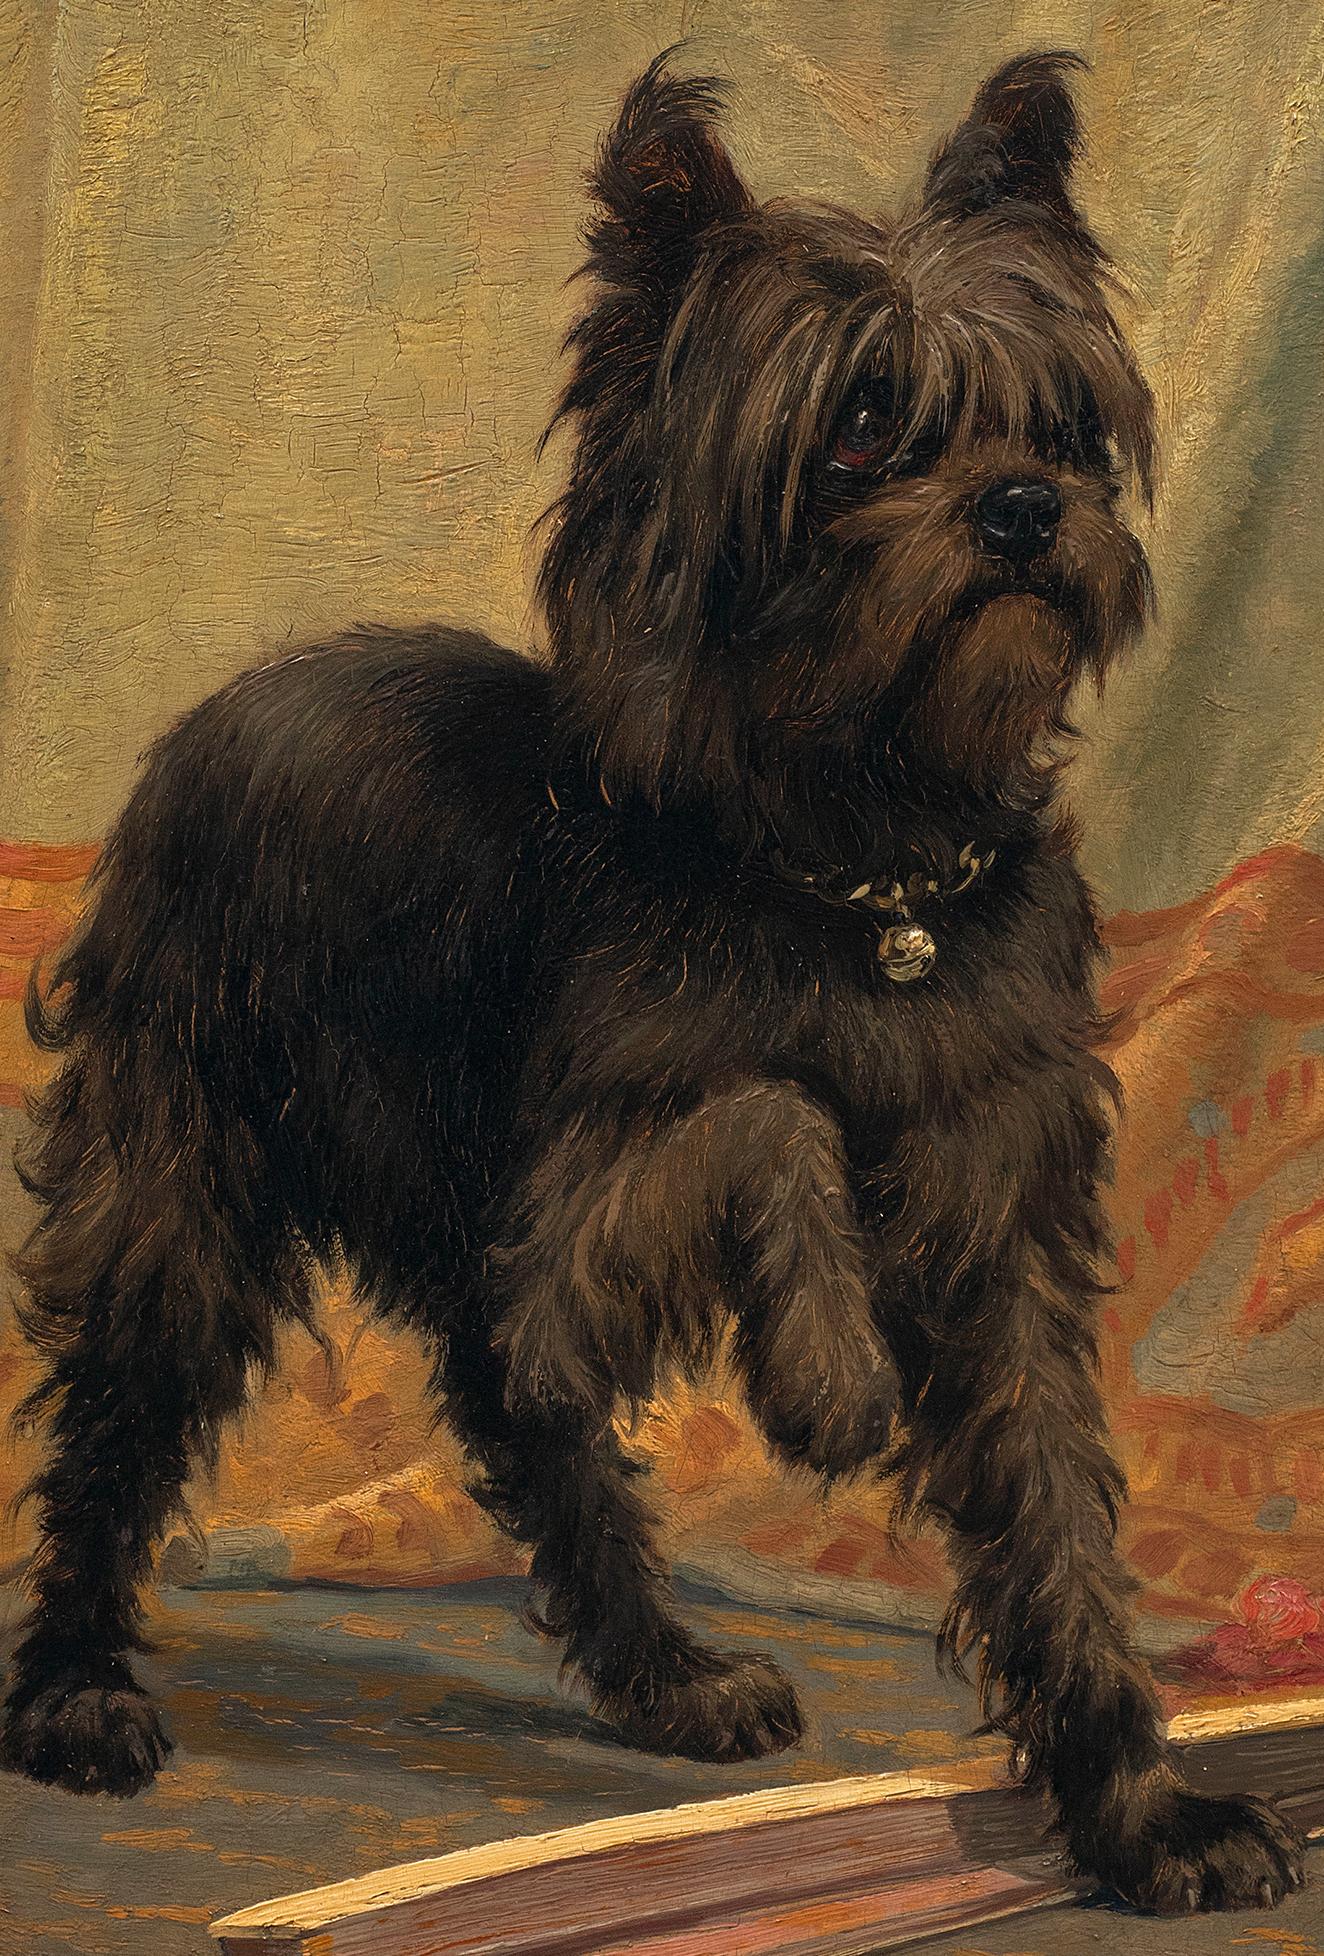 “Quick” A portrait of a Brussels Griffon
Charles Boland de Spa (Belgium, 1850-?)
Oil on panel
16 x 12 (24 ½ x 20 ½ frame)
Signed recto “Ch Boland 1888” and verso

Charles Boland specialized in painting animals, landscapes, genre scenes and